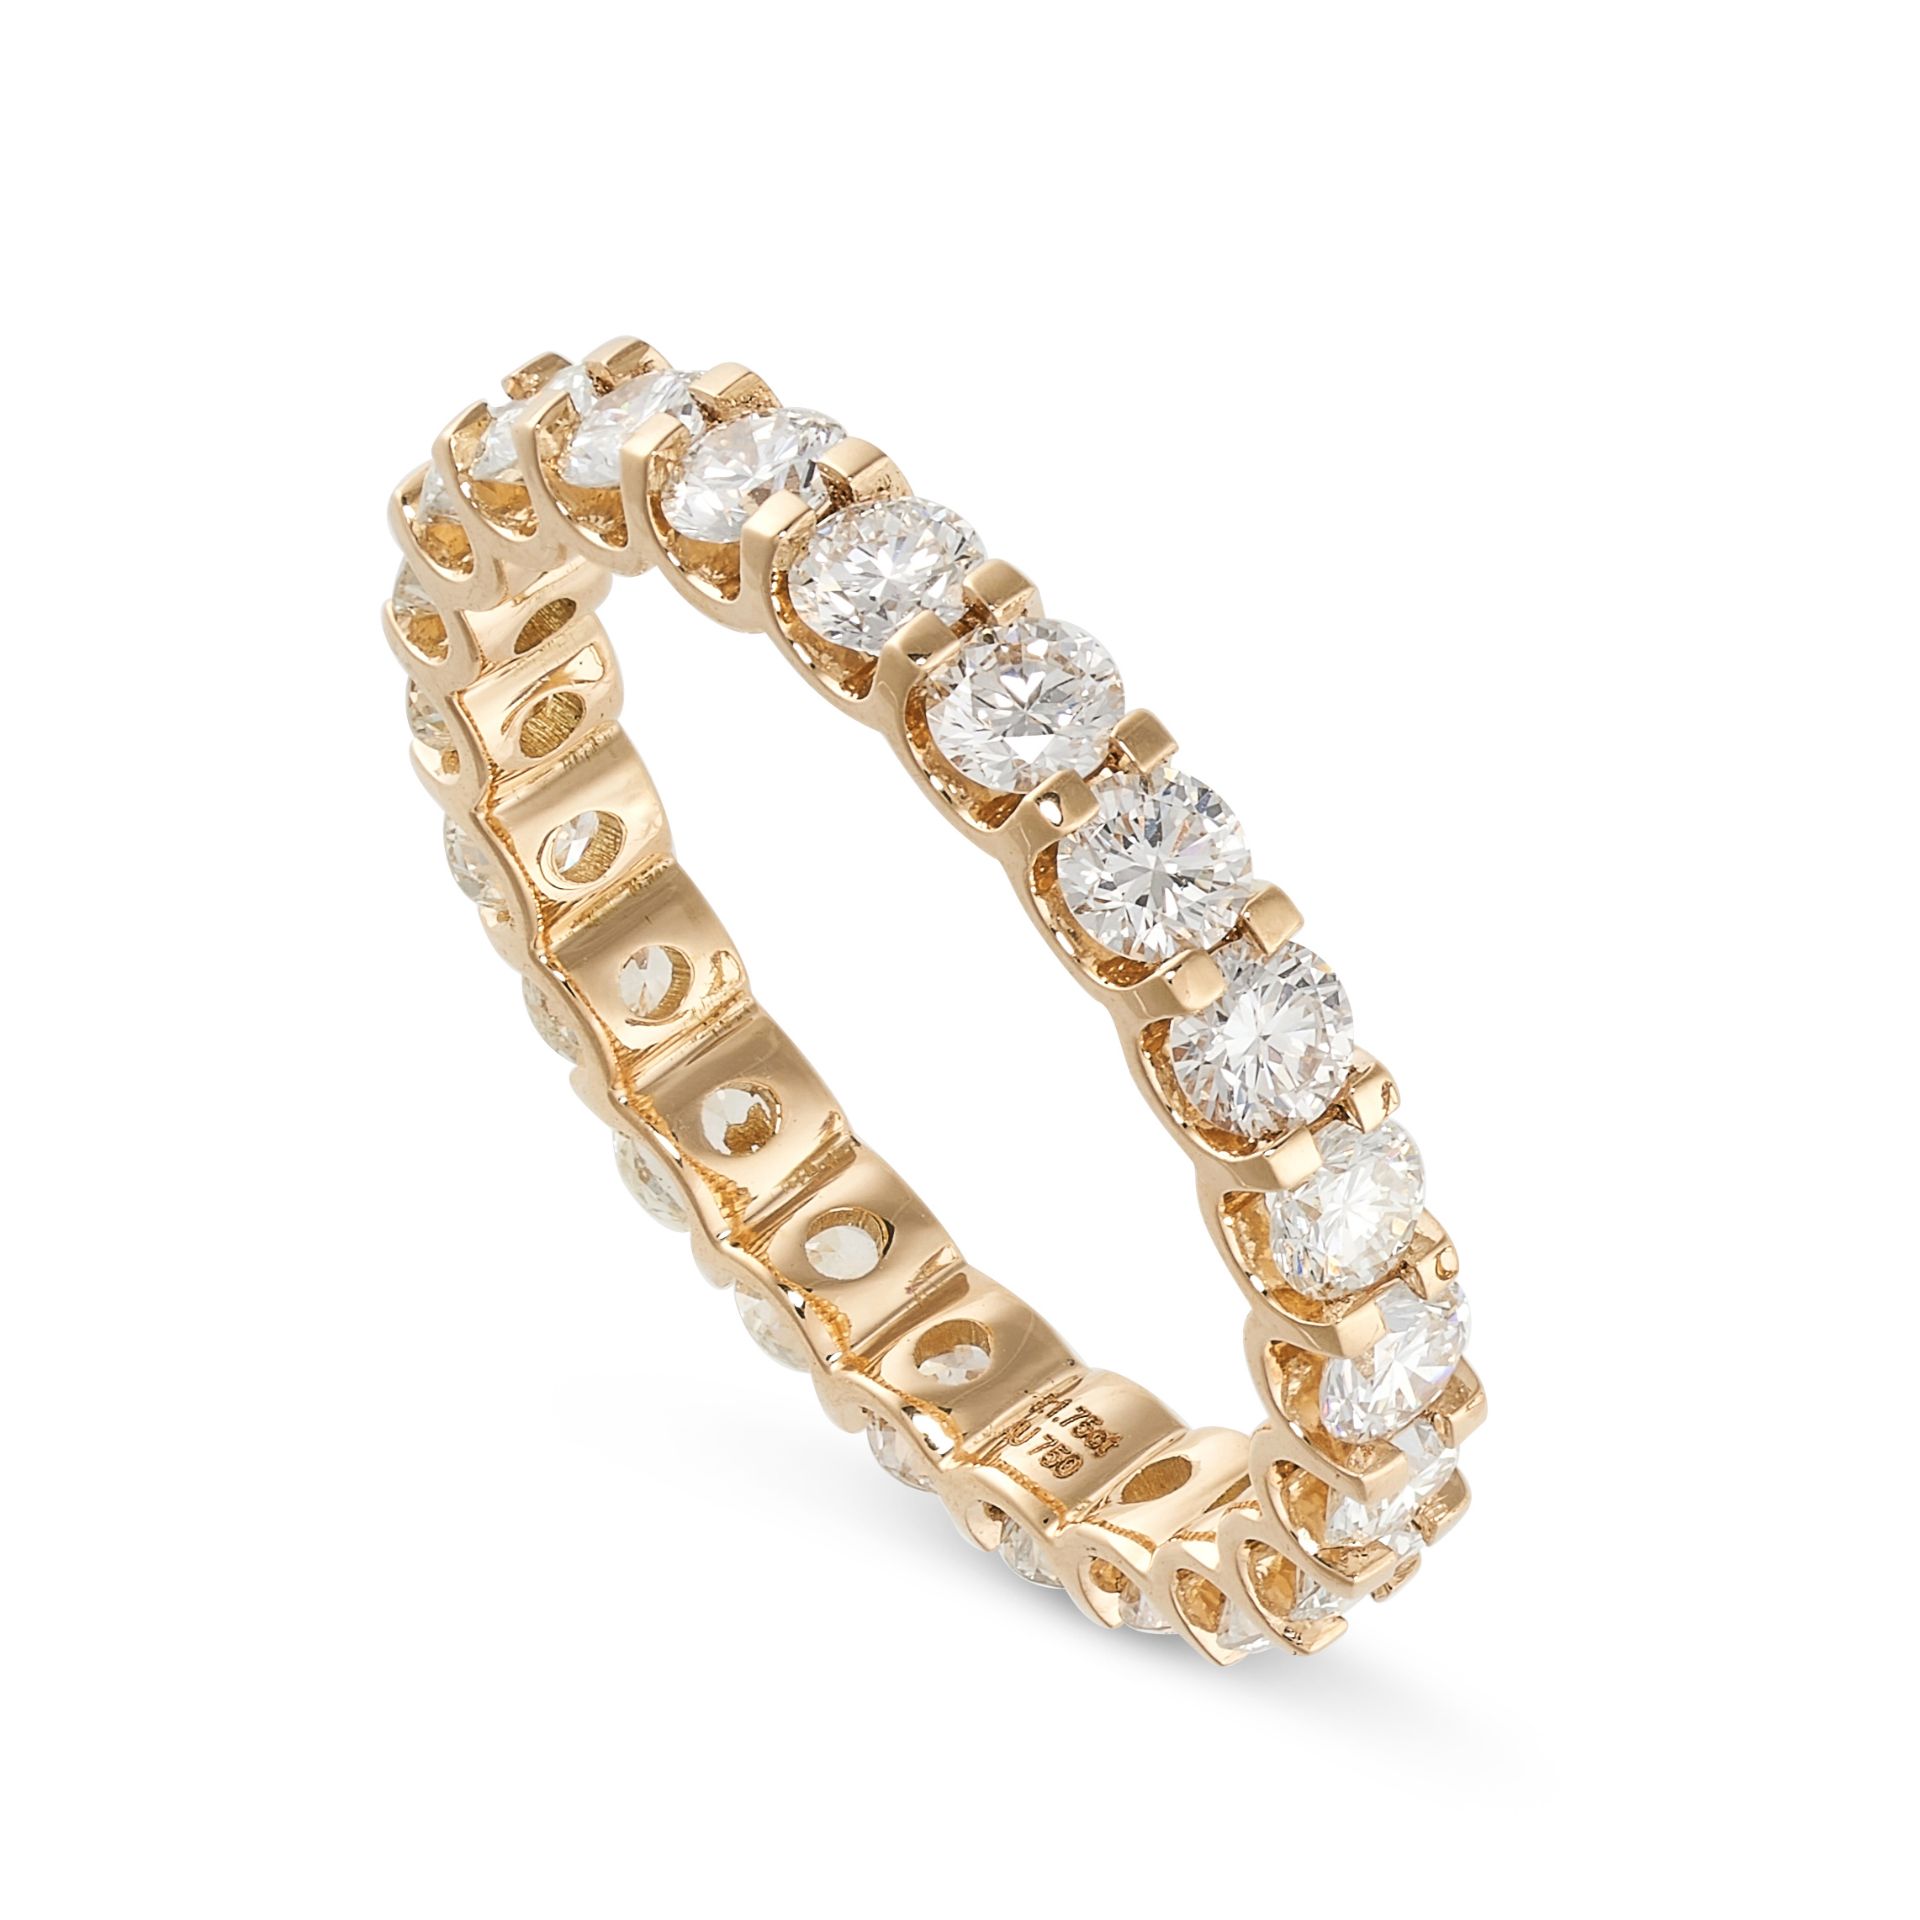 A DIAMOND FULL ETERNITY RING the band set all around with a single row of round cut diamonds, the